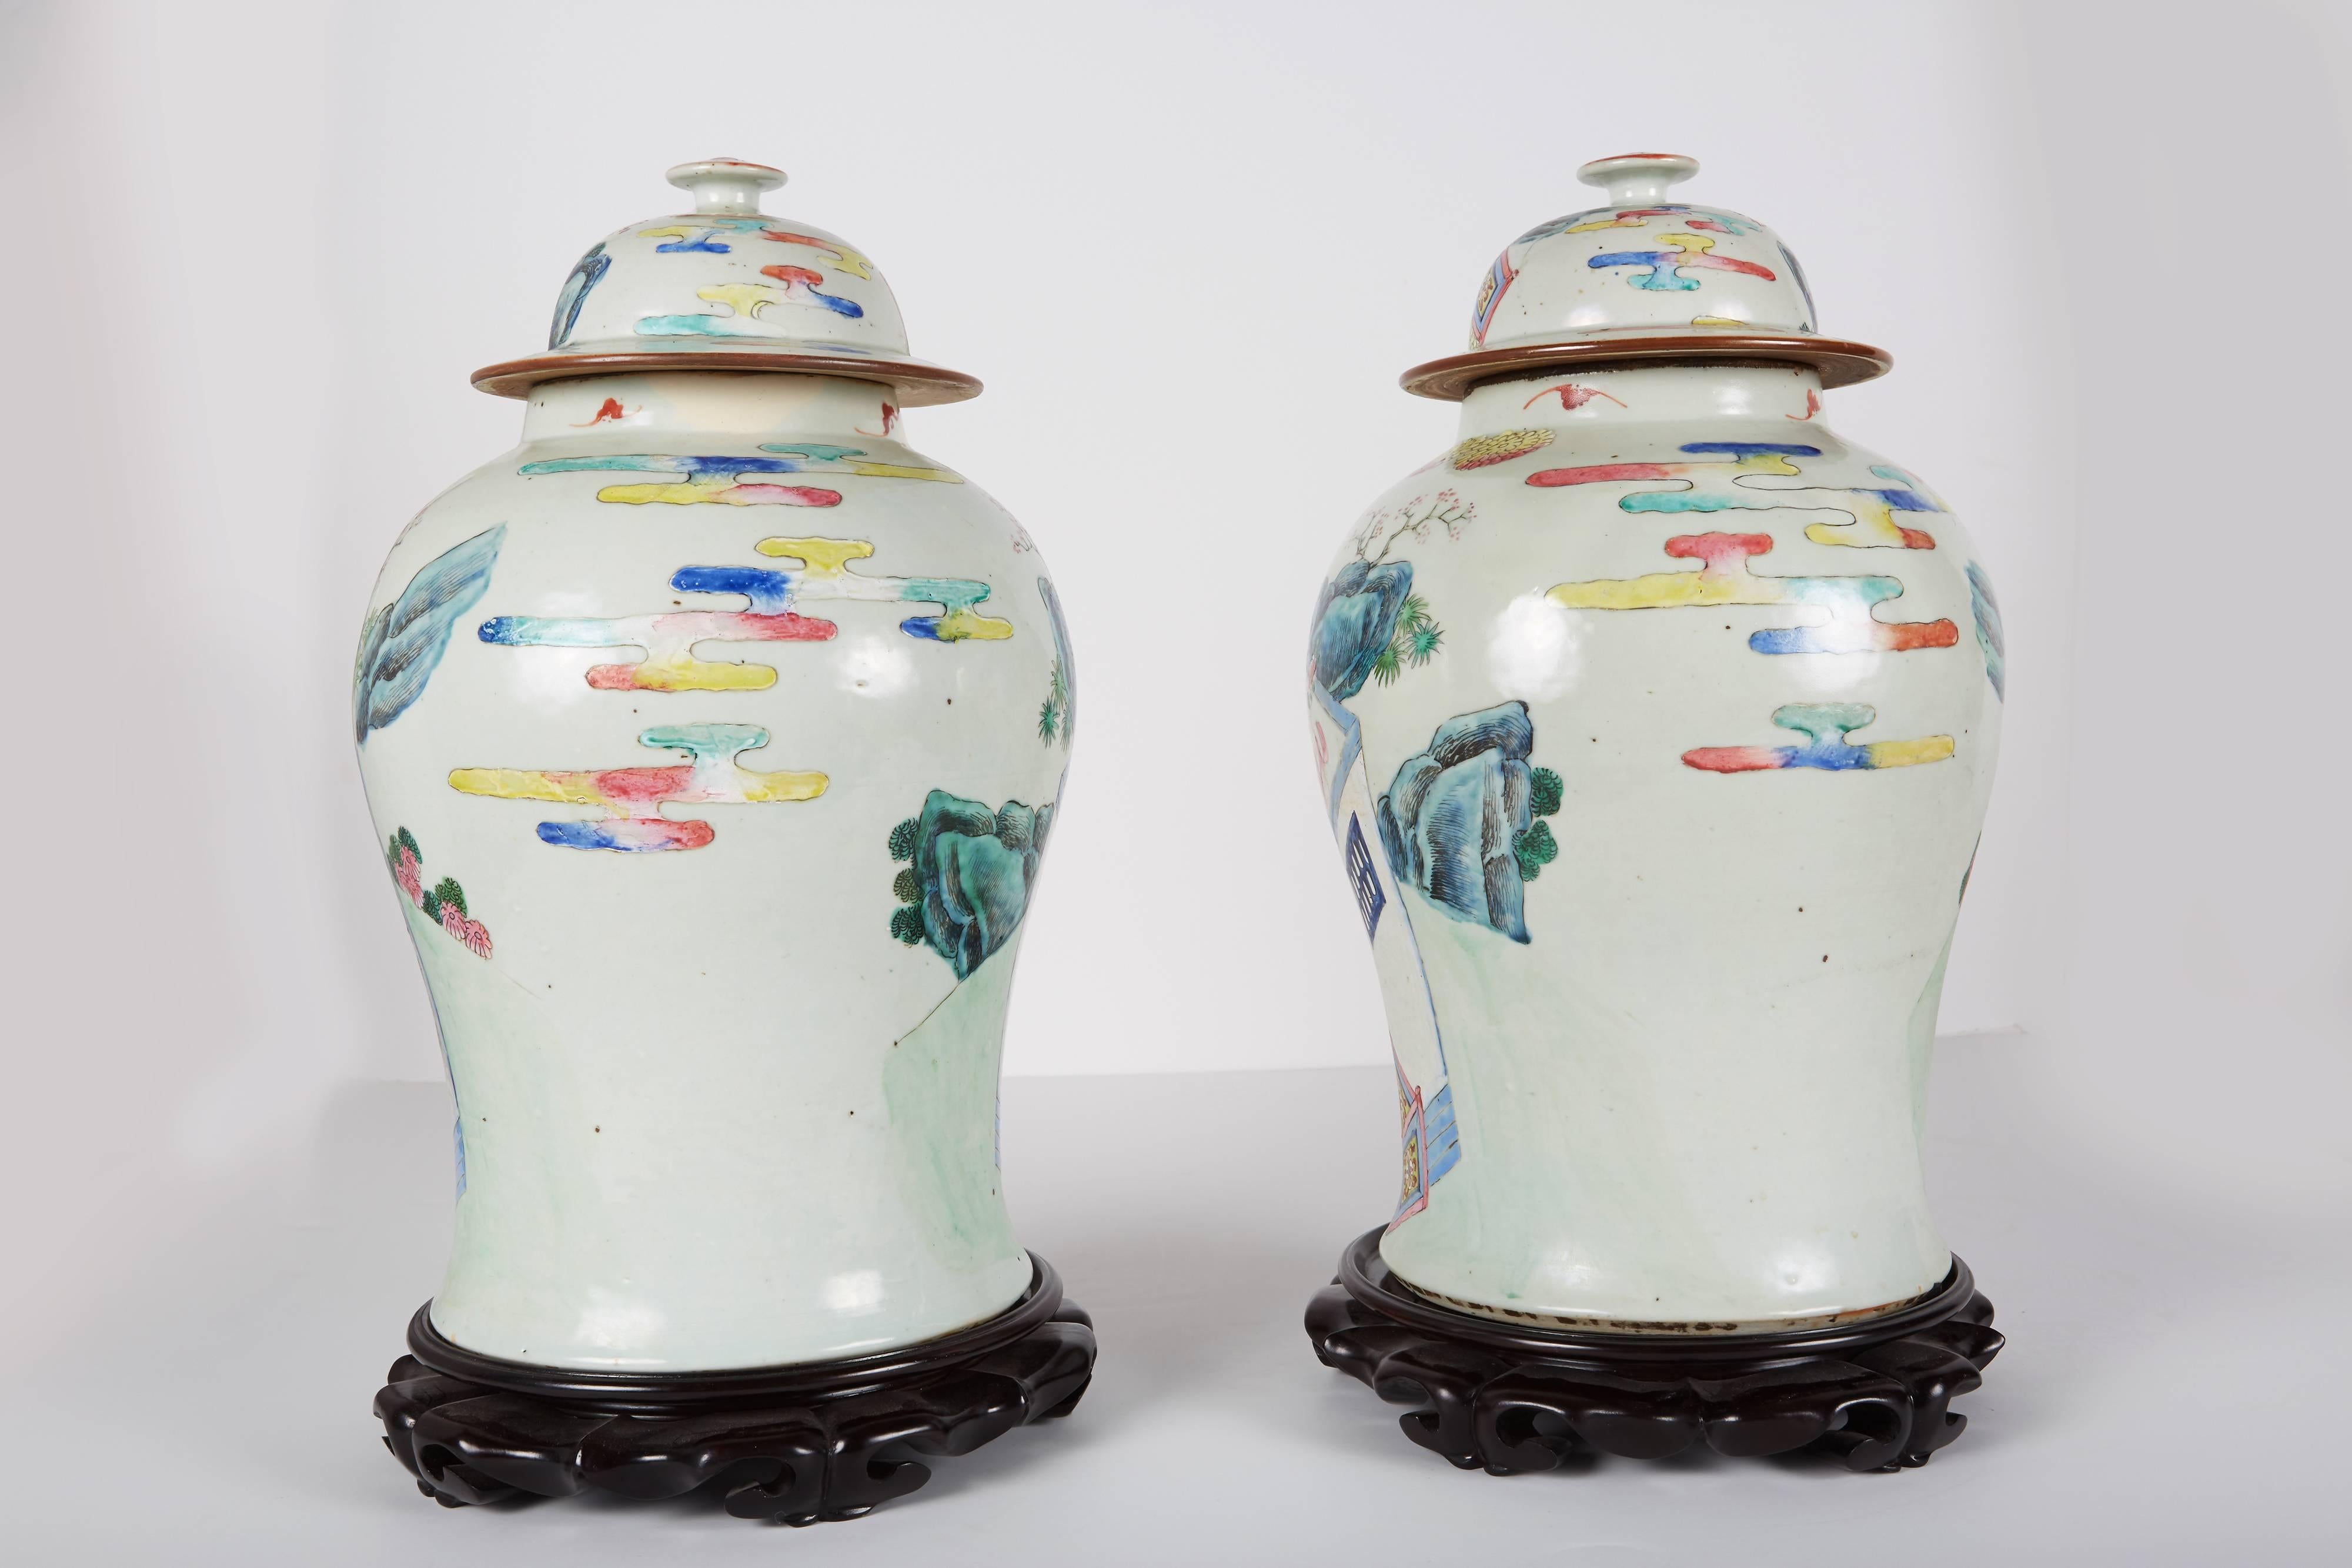 Chinese Export Pair of Large Lidded Chinese Ginger Jars